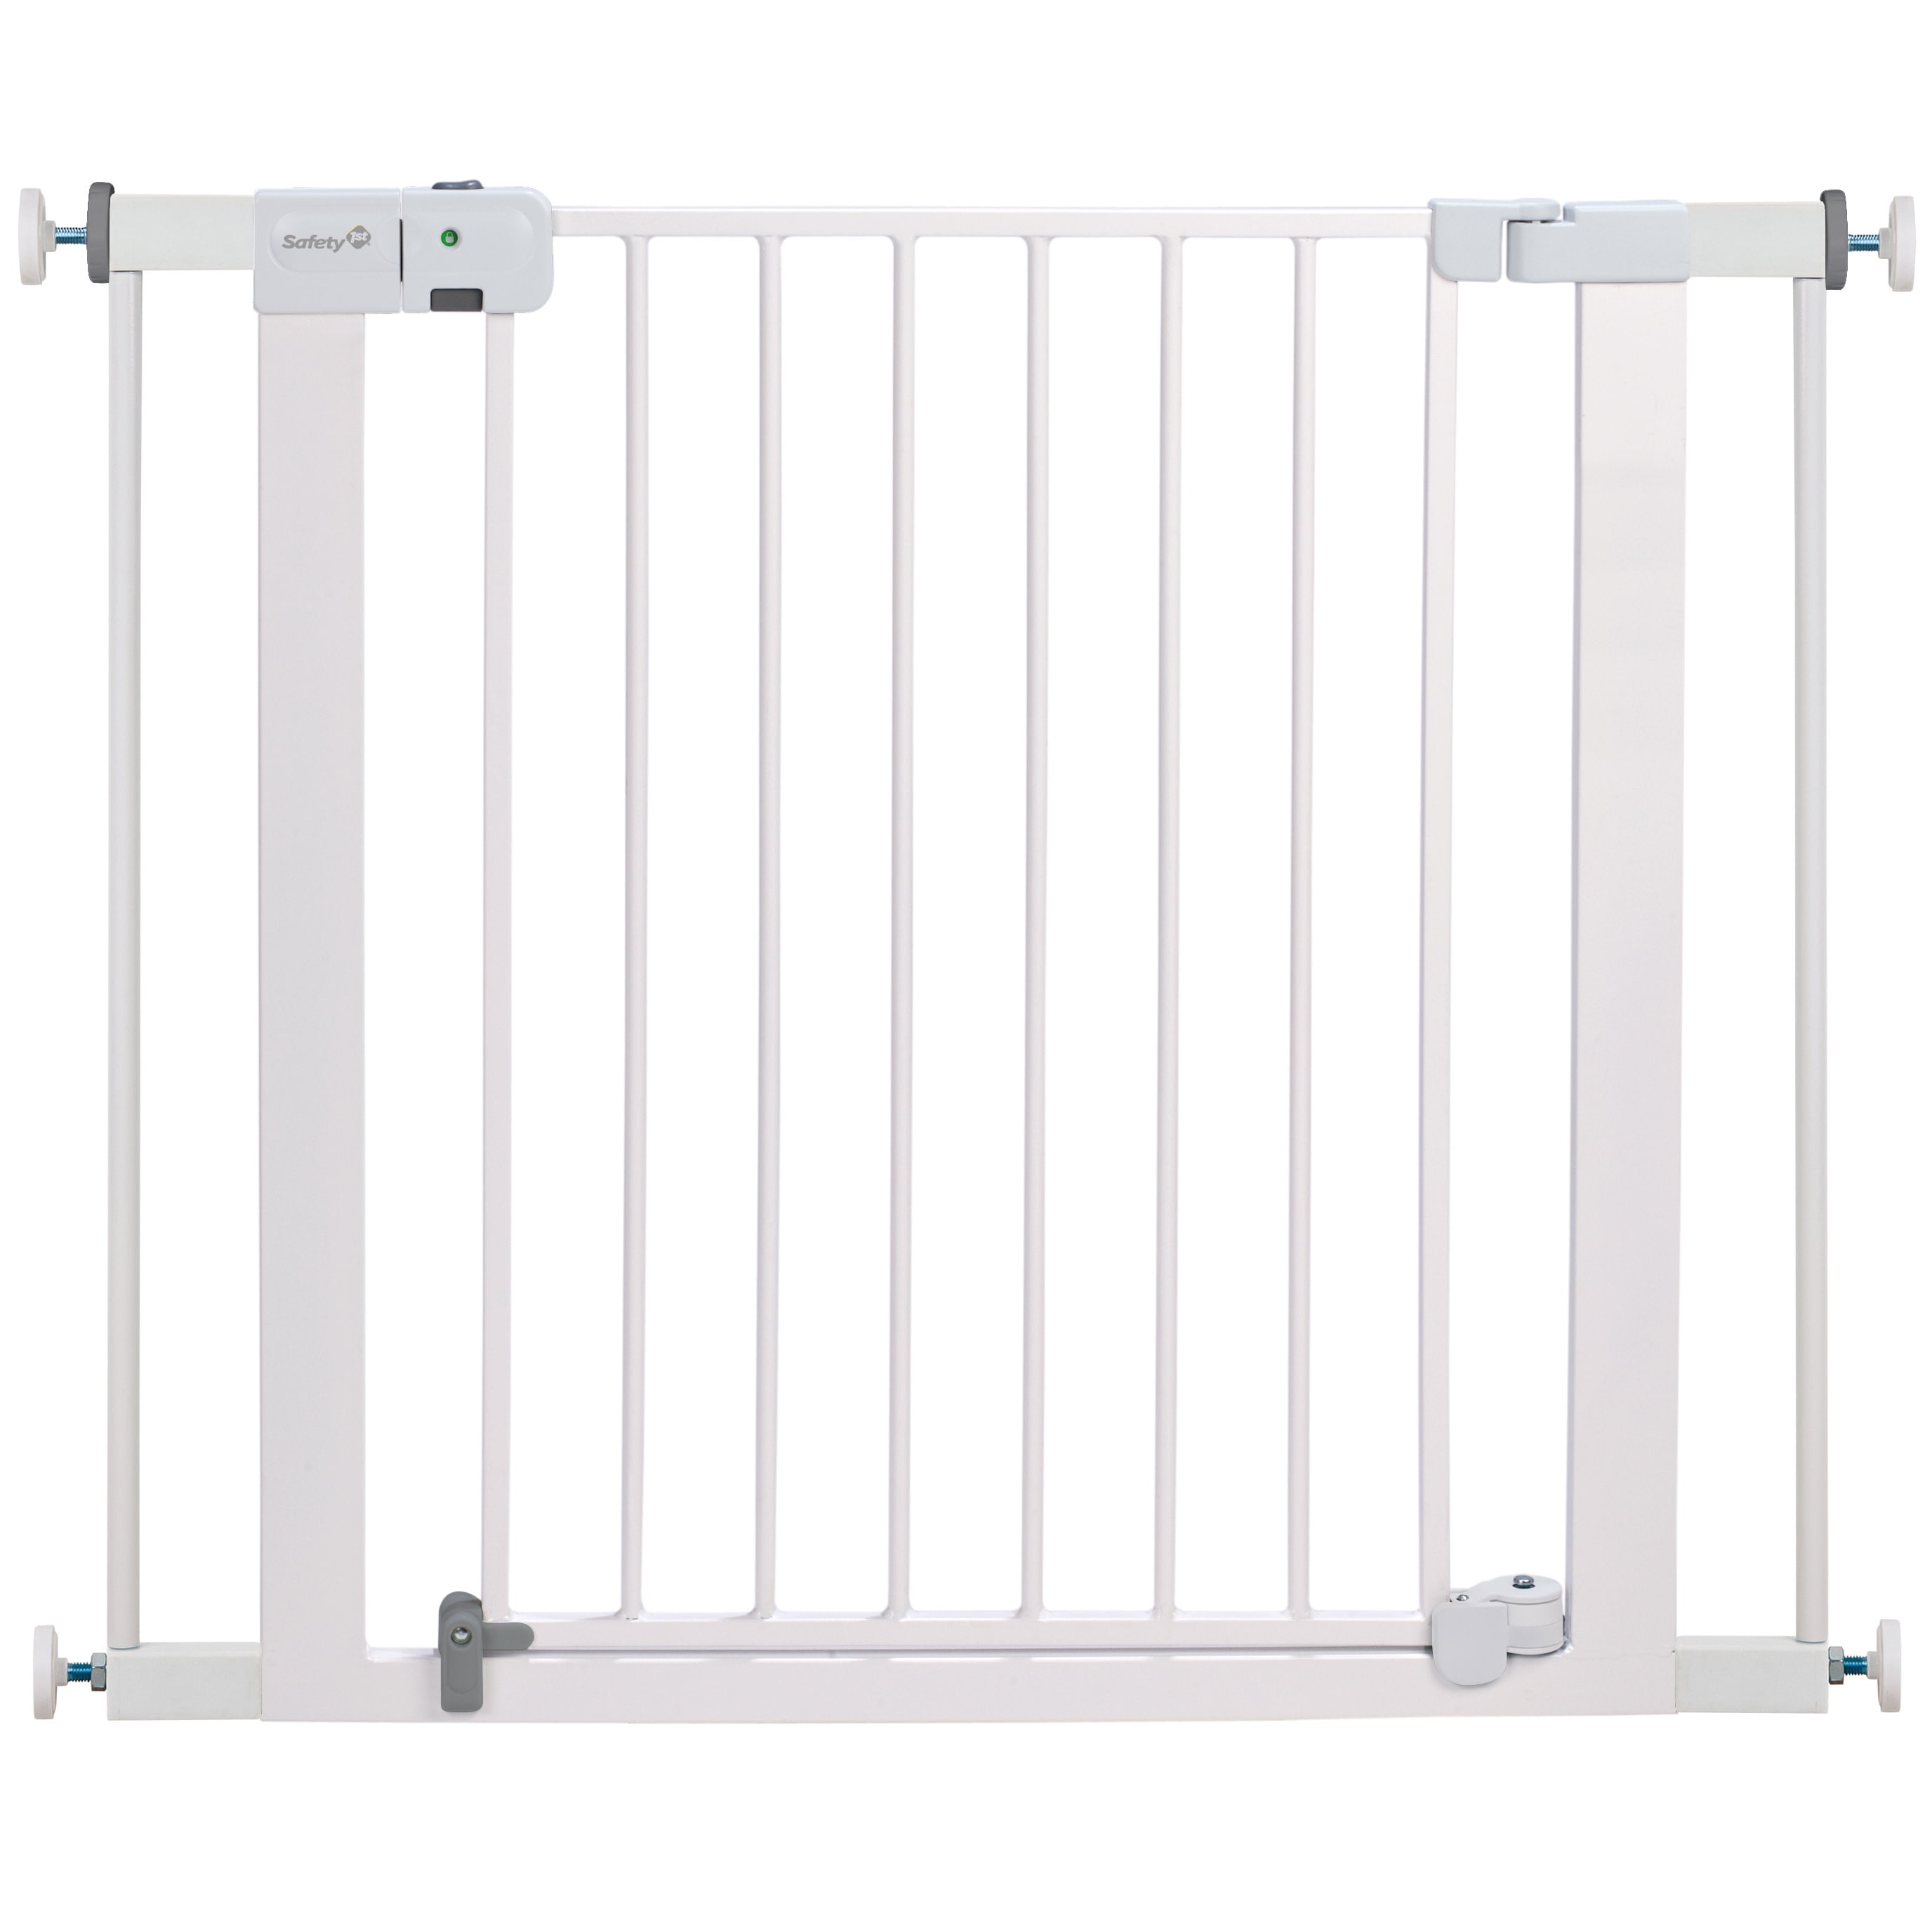 Safety 1ˢᵗ Easy Install Extra Tall & Wide Gate, White - Walmart.com